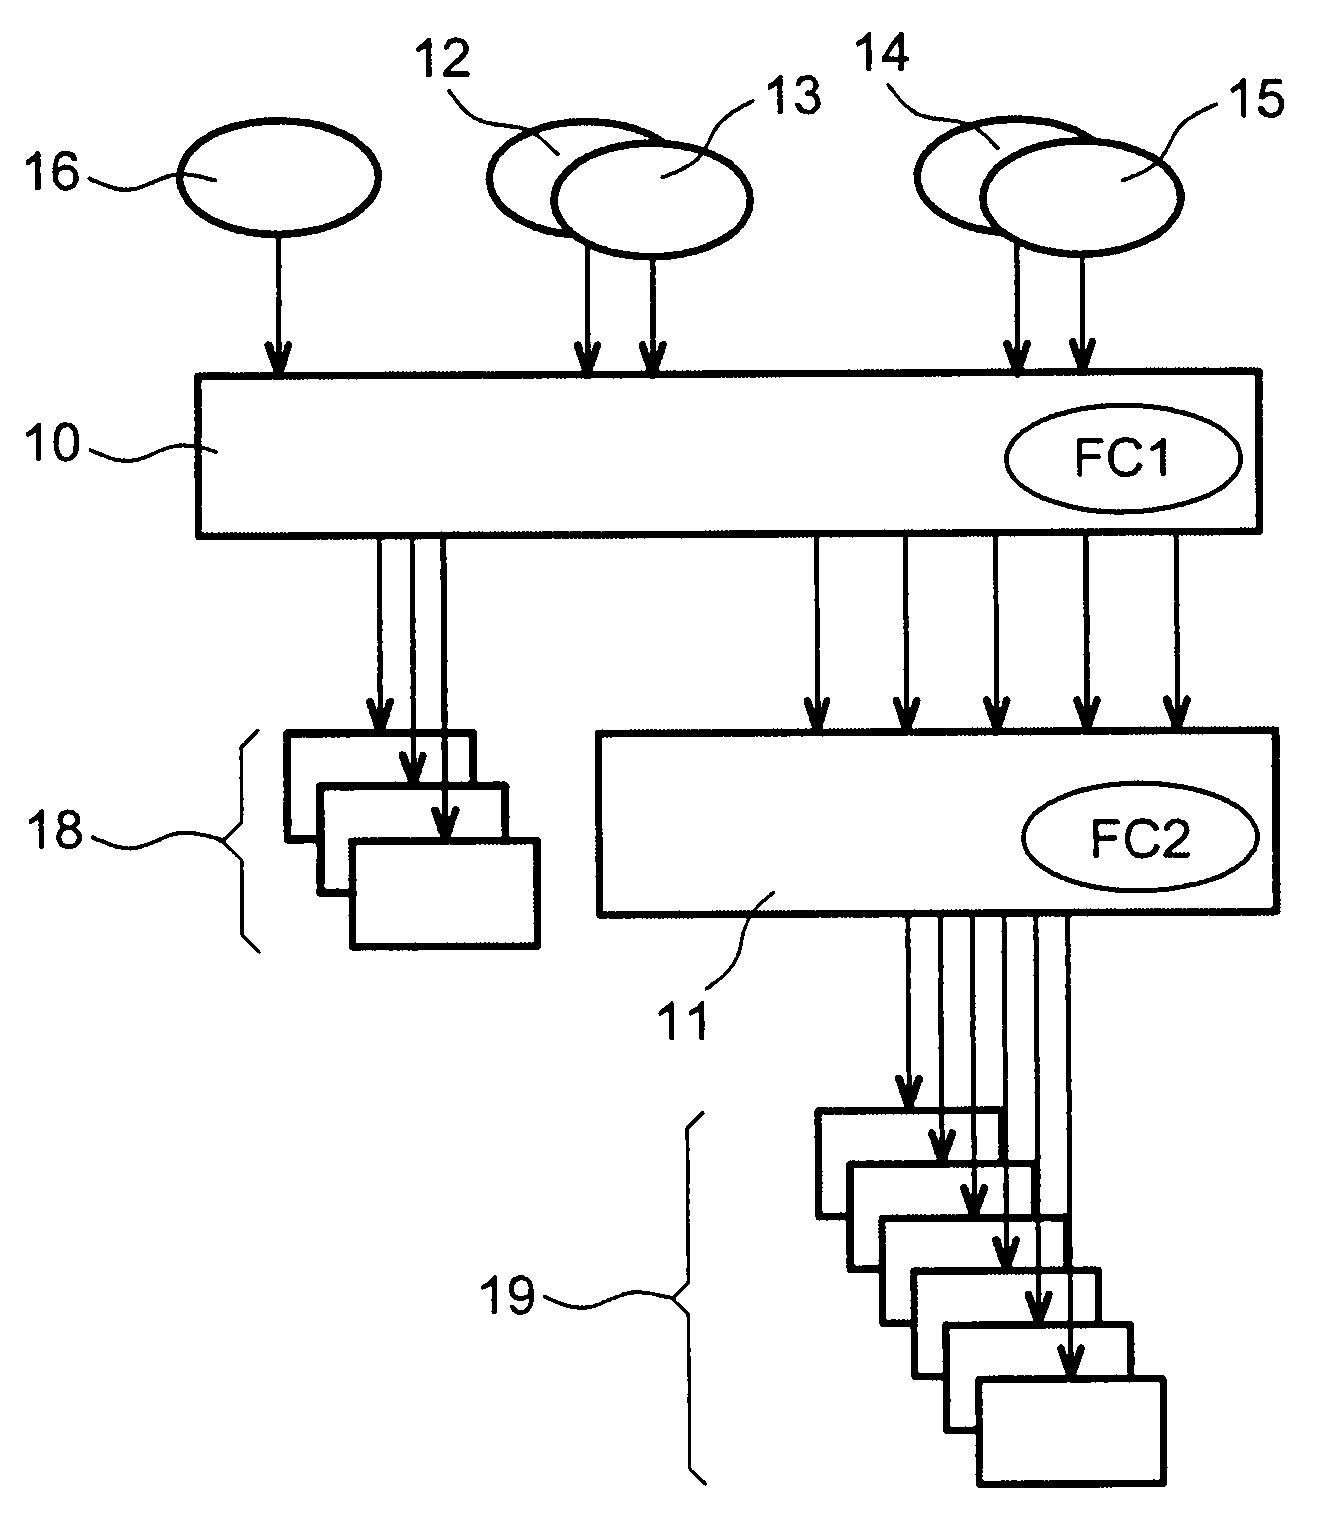 Electricity distribution system and method inside an aircraft